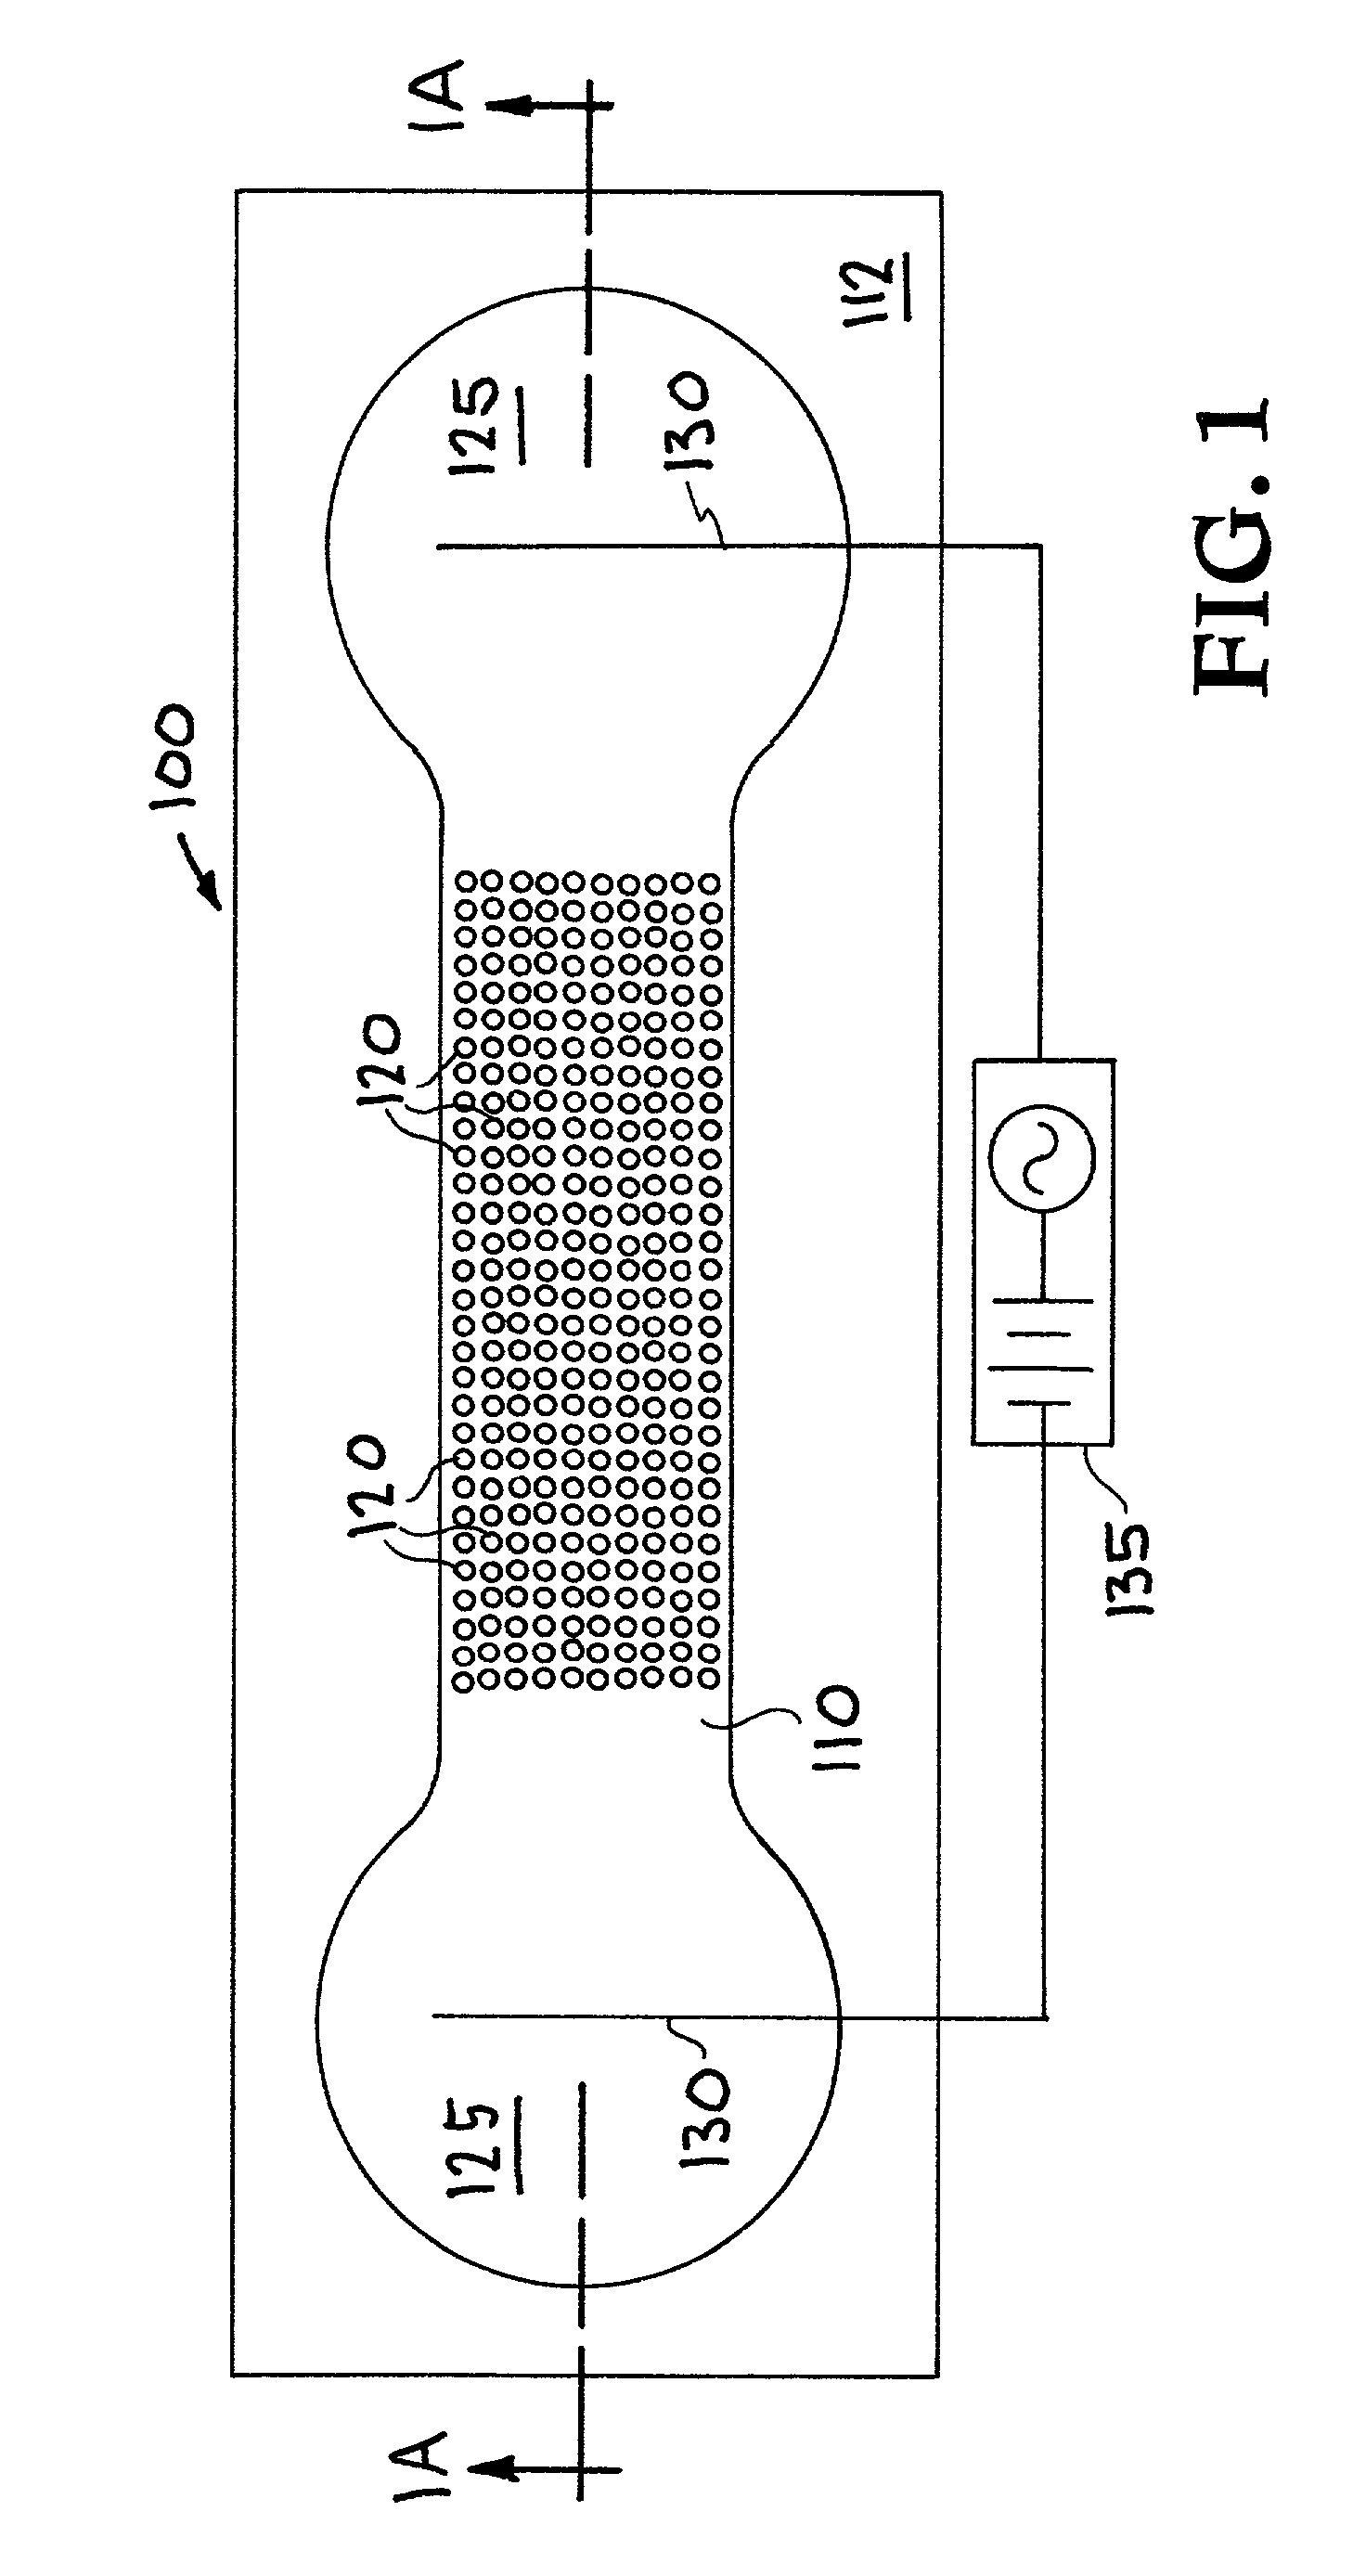 Dielectrophoretic systems without embedded electrodes